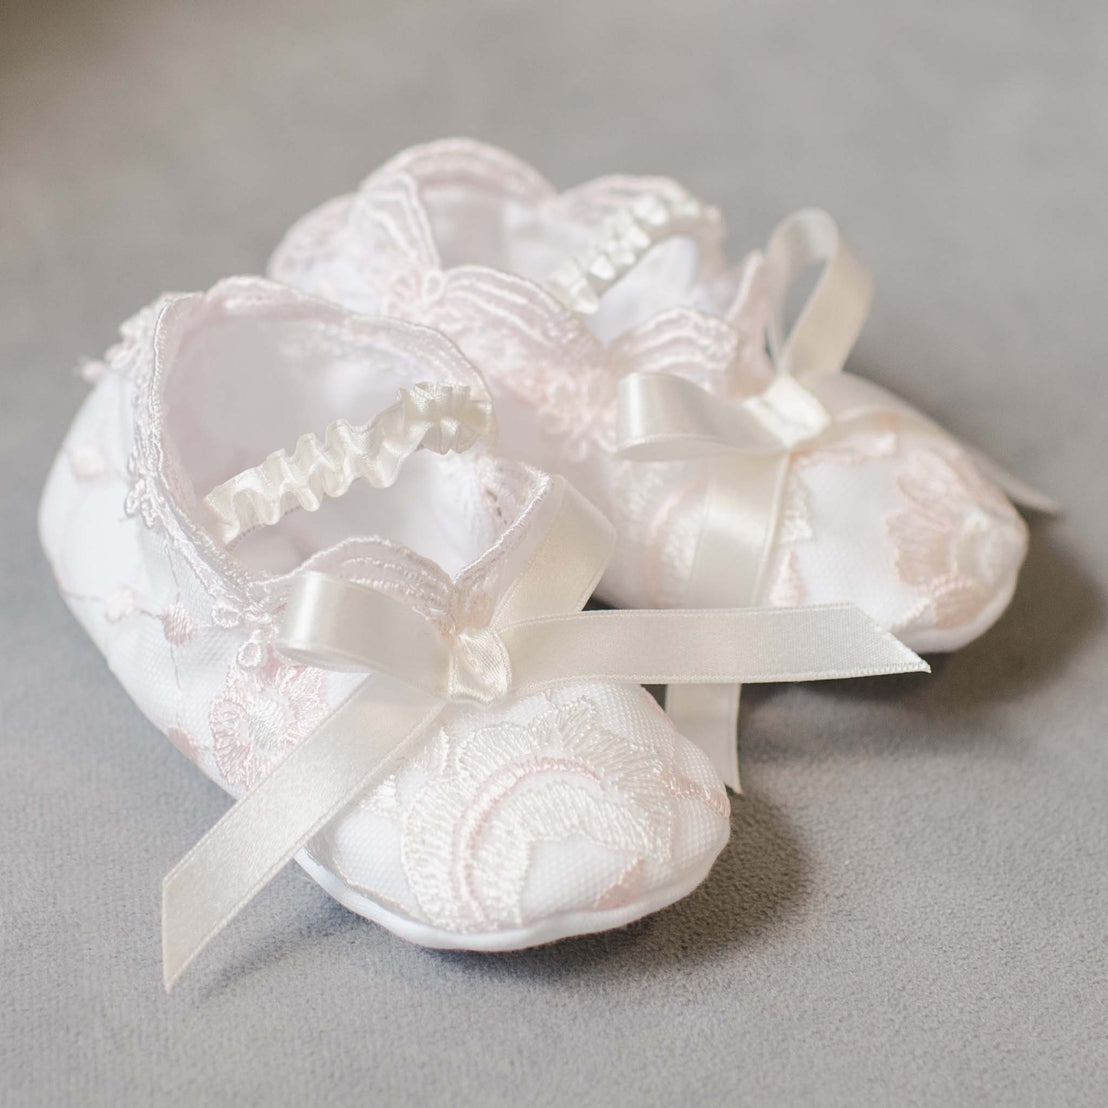 A pair of delicate white Joli Booties adorned with lace and satin ribbons, perfect for a baptism, displayed on a soft gray background in an upscale boutique.